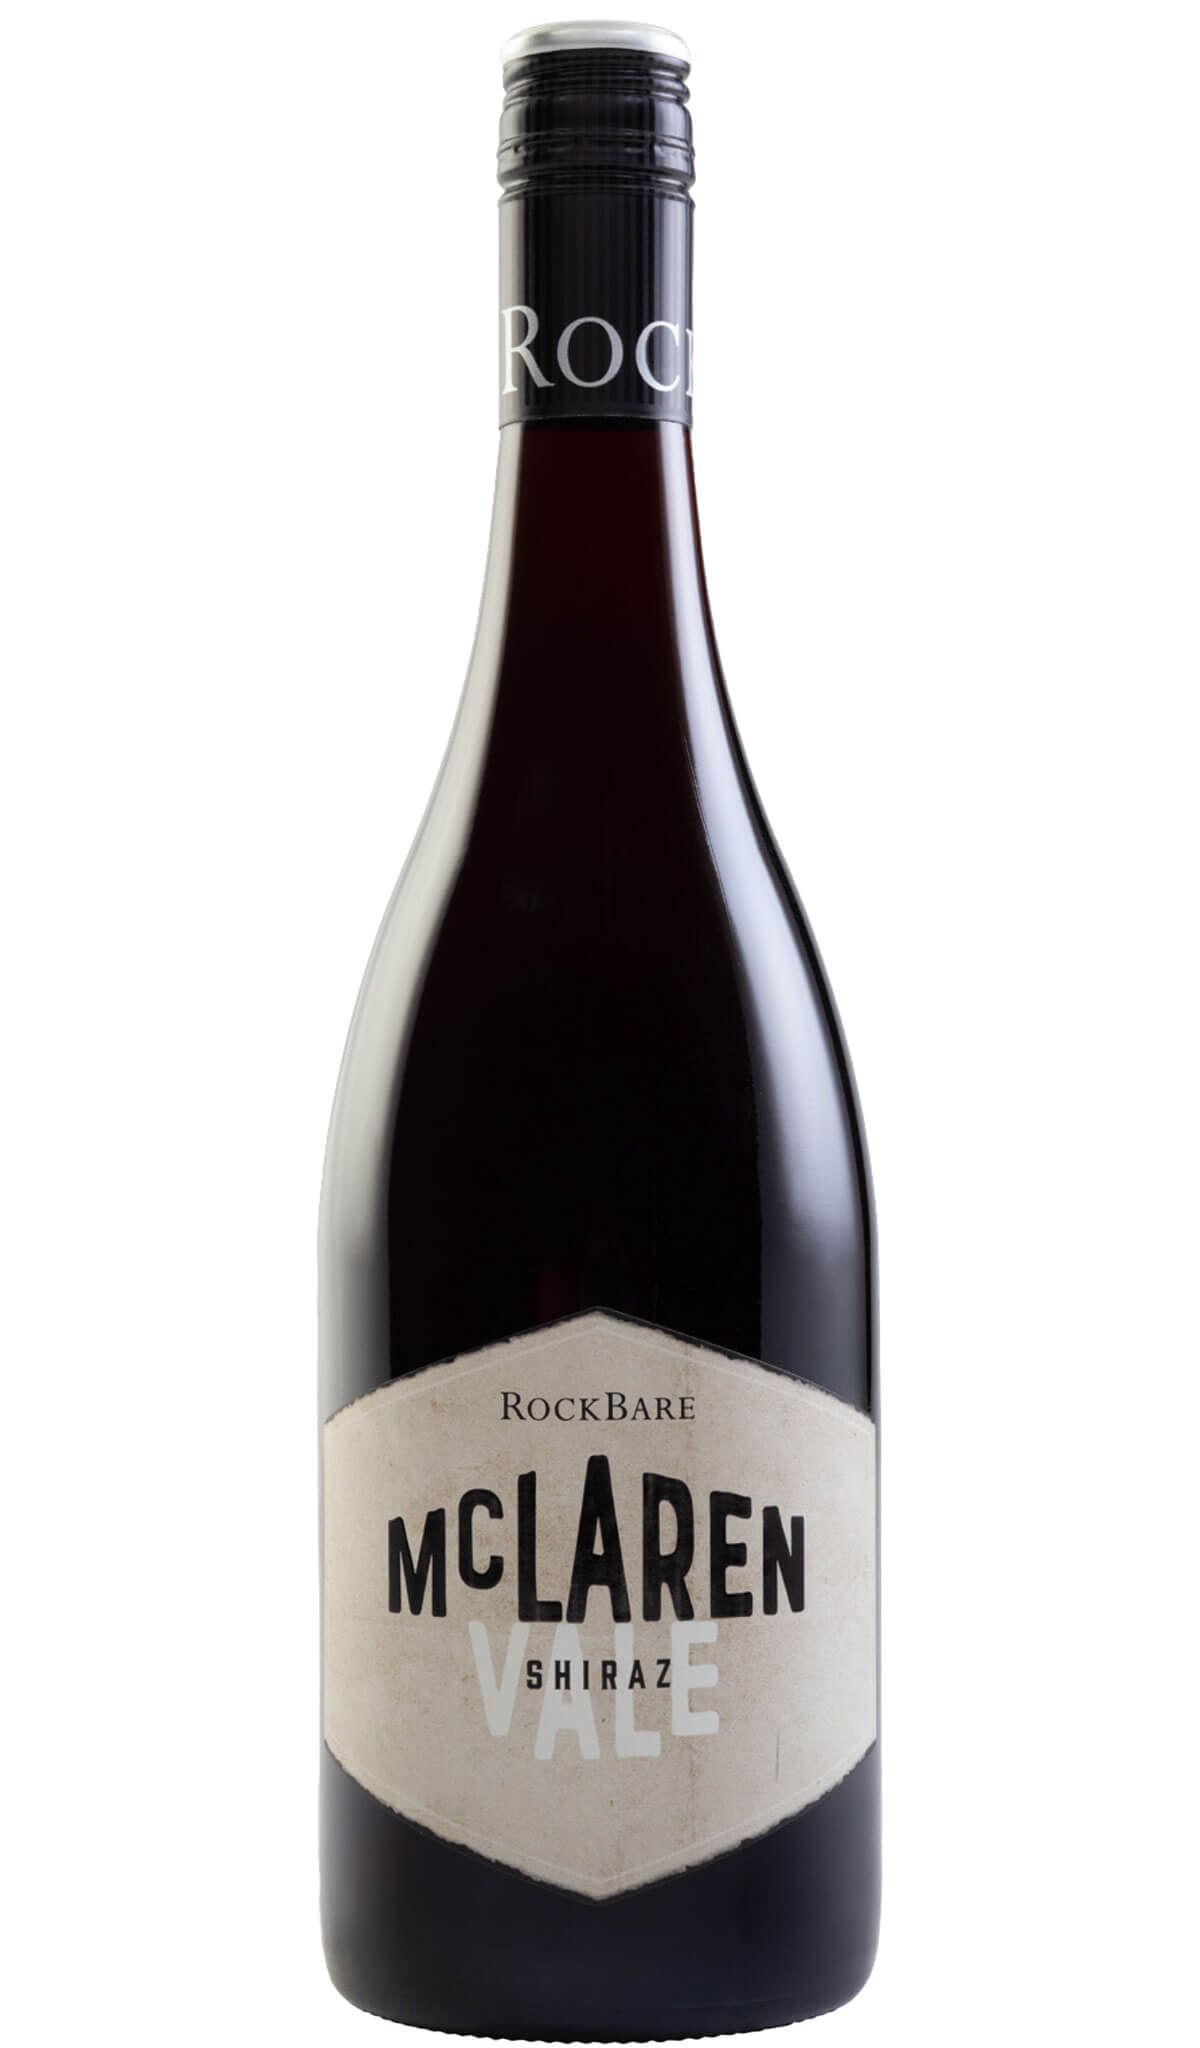 Find out more or buy RockBare McLaren Vale Shiraz 2020 online at Wine Sellers Direct - Australia’s independent liquor specialists.